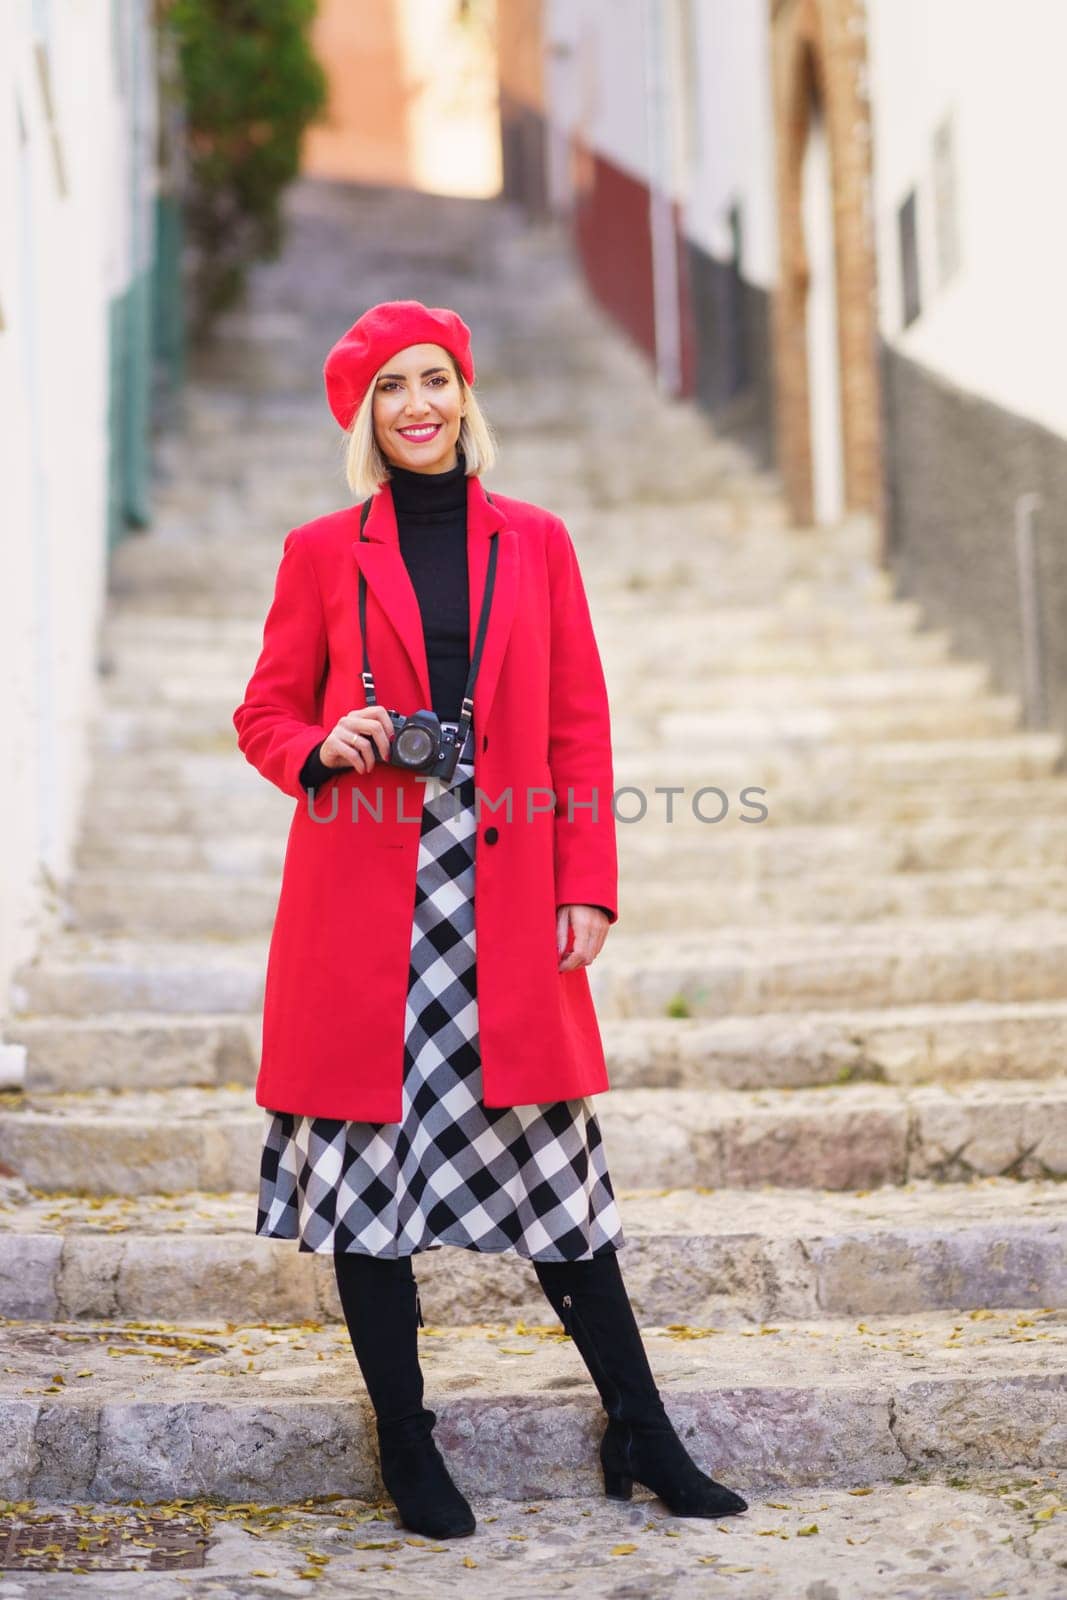 Confident stylish lady standing on stairway in city old residential district by javiindy